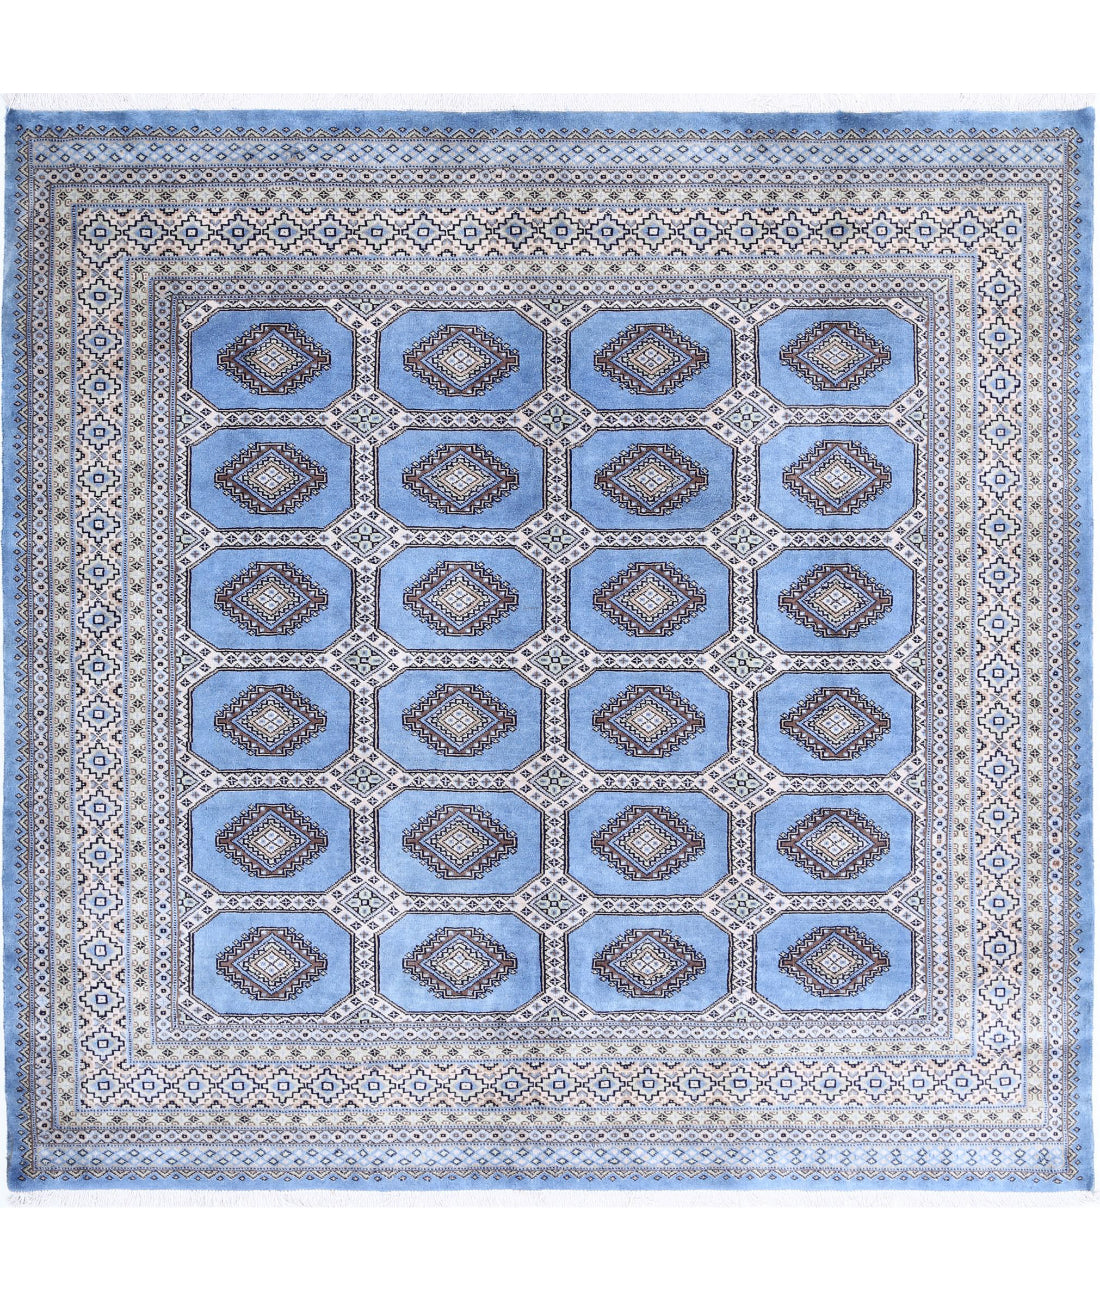 Hand Knotted Tribal Bokhara Wool Rug - 6&#39;7&#39;&#39; x 6&#39;5&#39;&#39; 6&#39;7&#39;&#39; x 6&#39;5&#39;&#39; (198 X 193) / Blue / Ivory